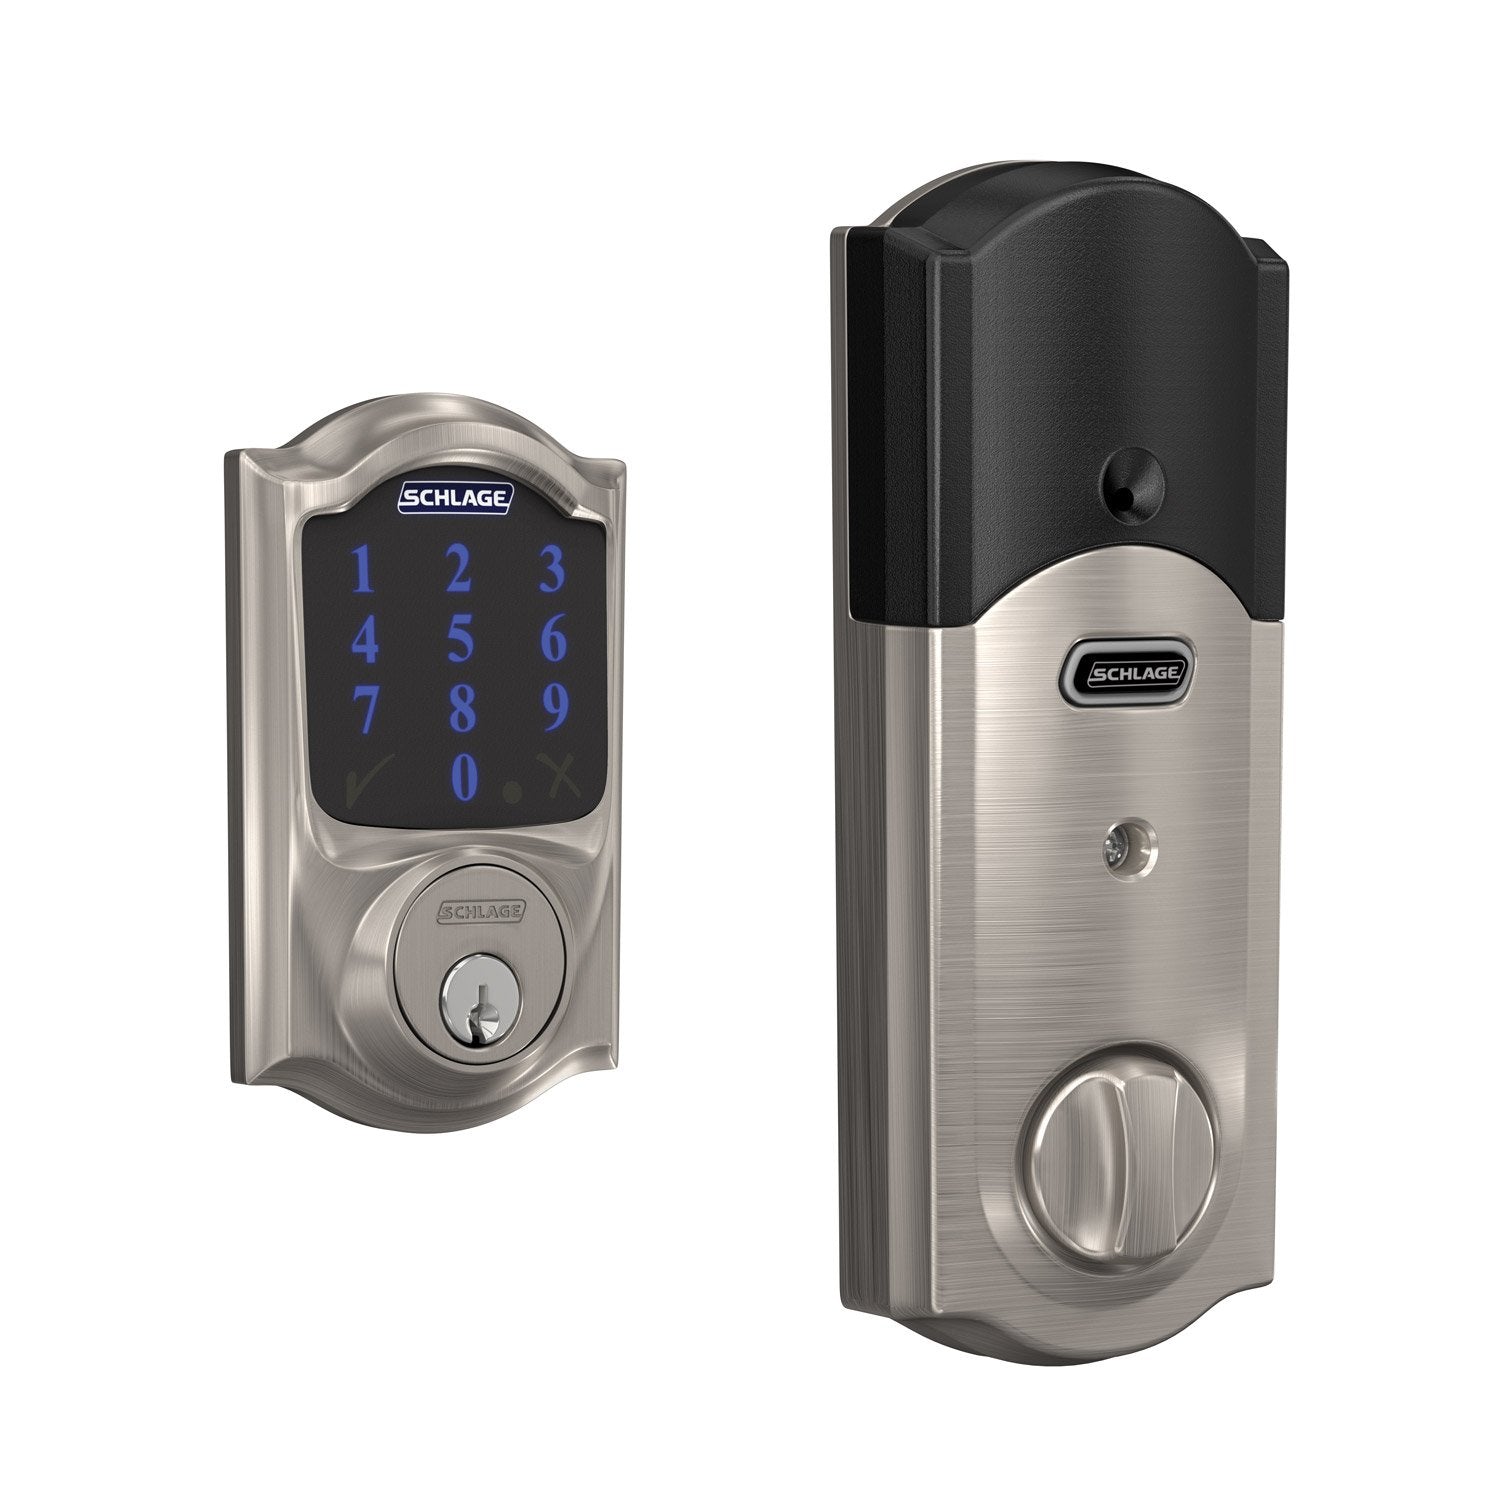 Schlage Connect Smart Deadbolt, Z-Wave Plus Enabled (for Works with Ring Alarm Security System) - Satin Nickel: Schlage Connect Smart Deadbolt